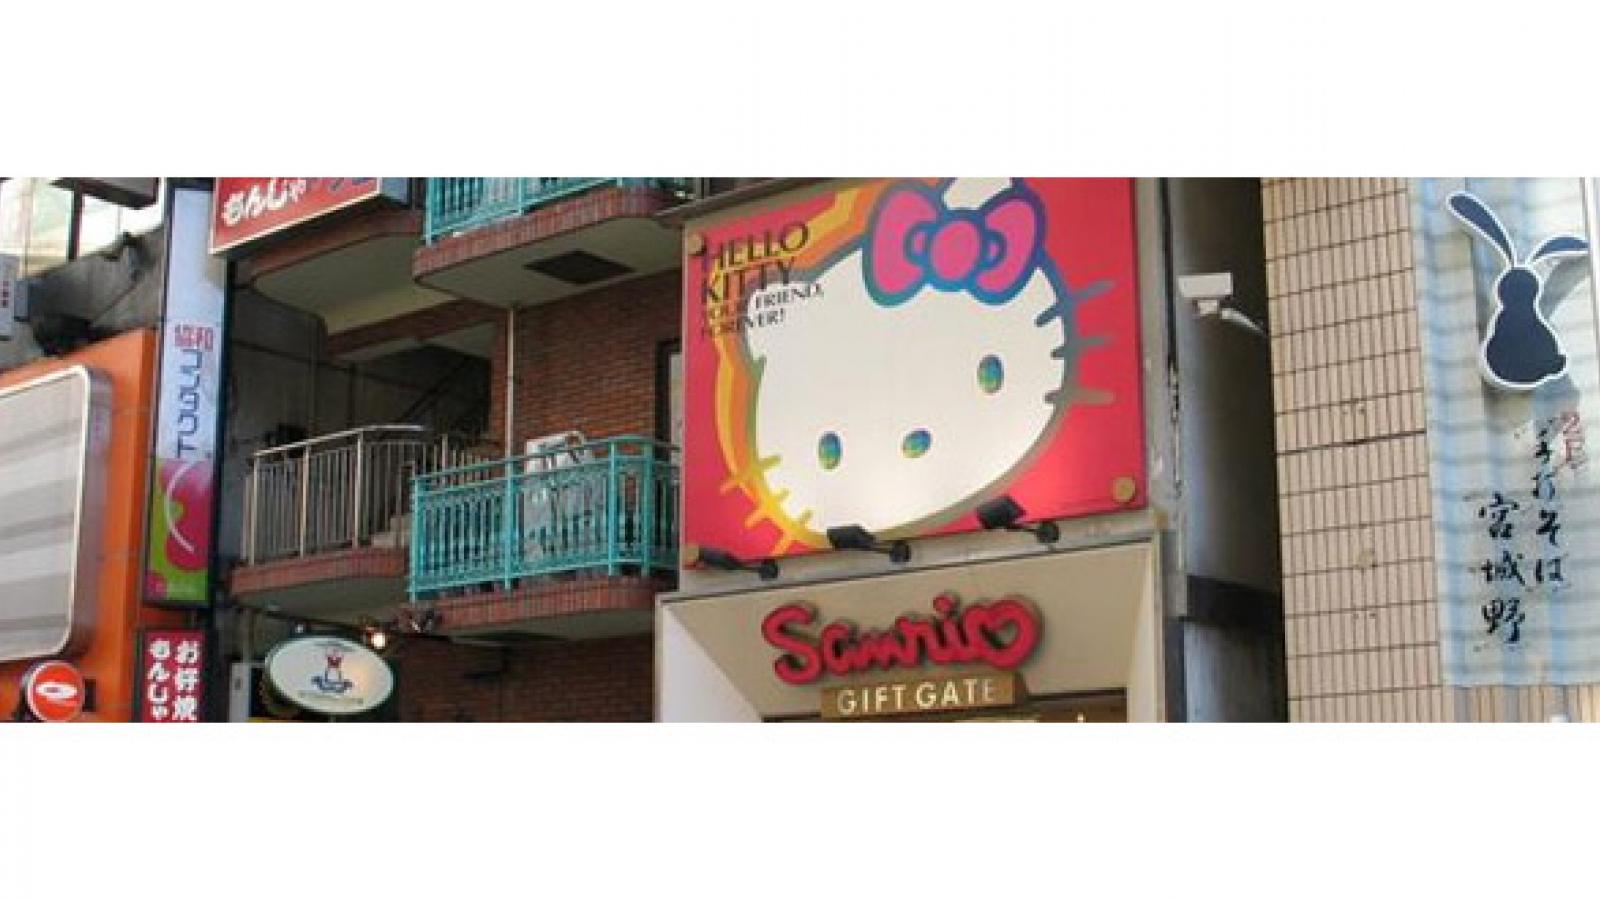 A Hello Kitty sign in Japan.